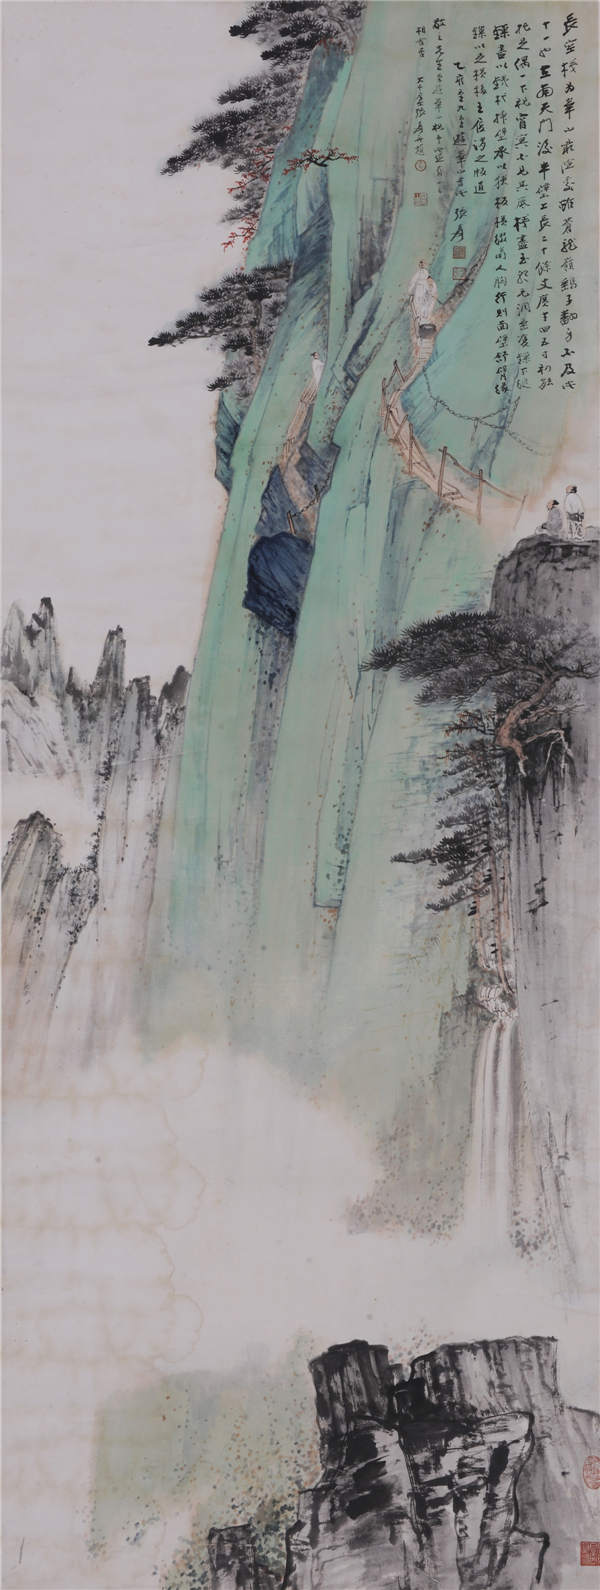 Chinese painter's famed work up for auction